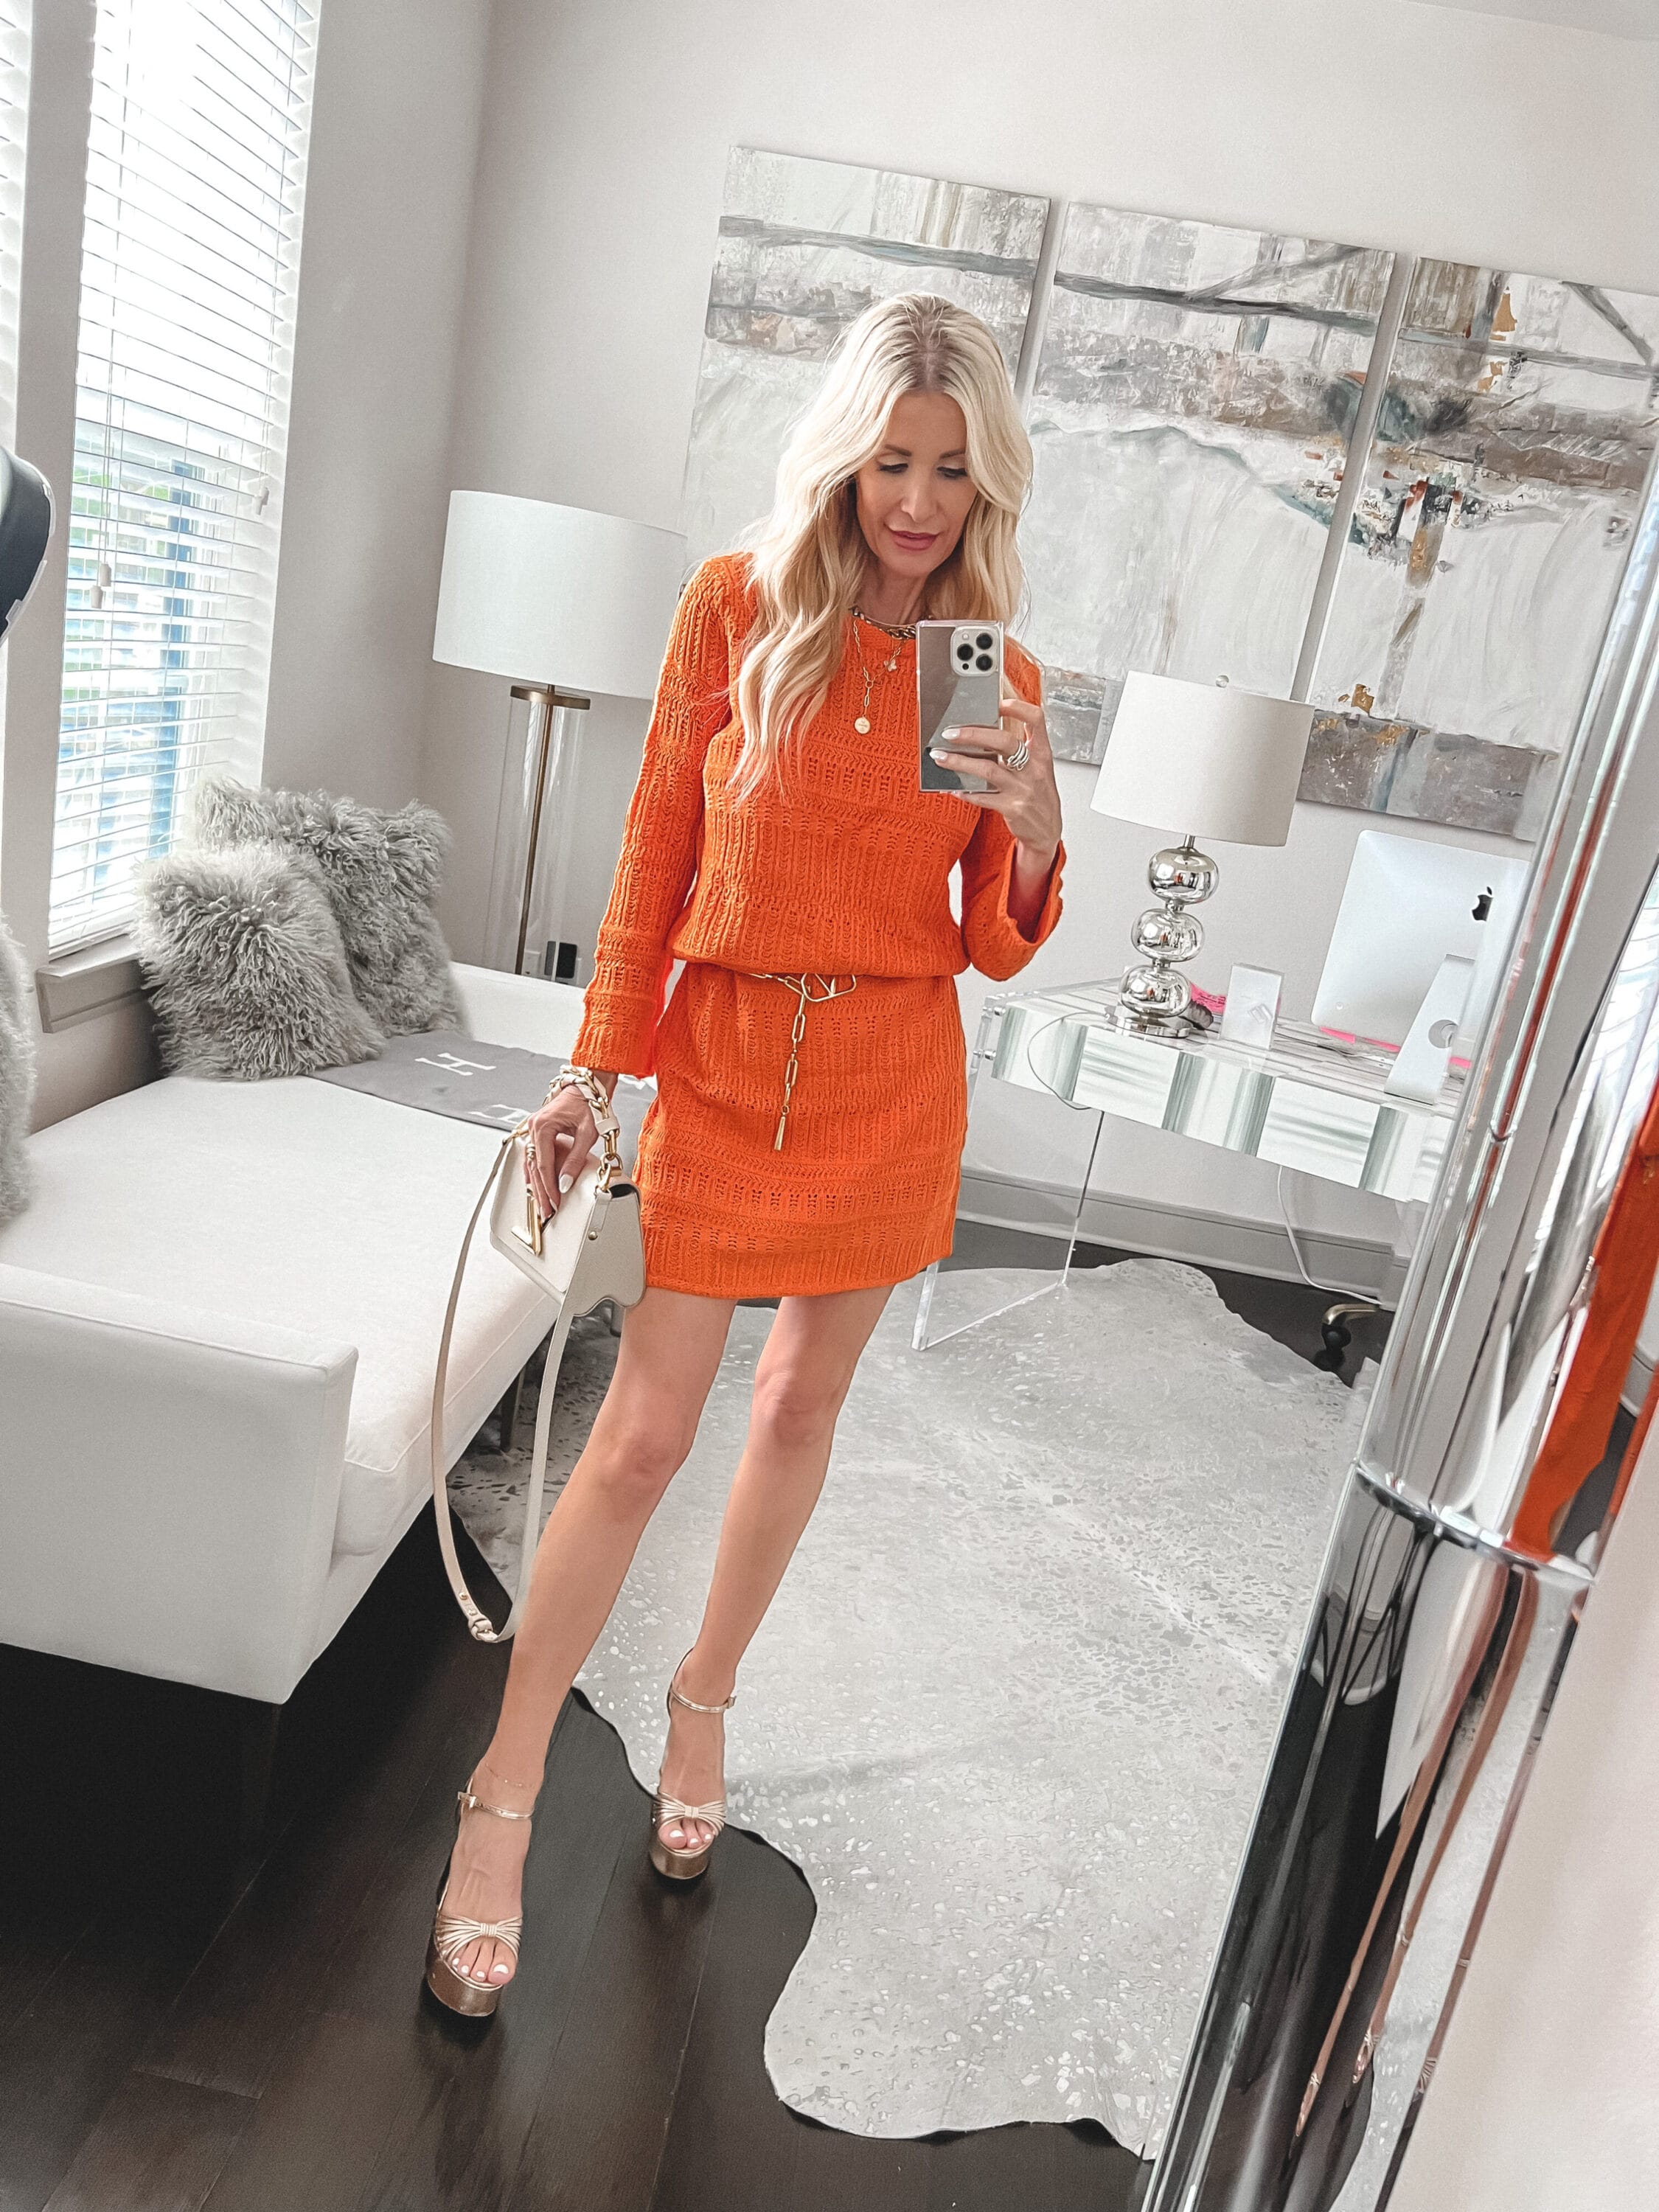 Over 40 Dallas stylist wearing an orange dress with gold platforms as one of the best under $50 summer must-haves.